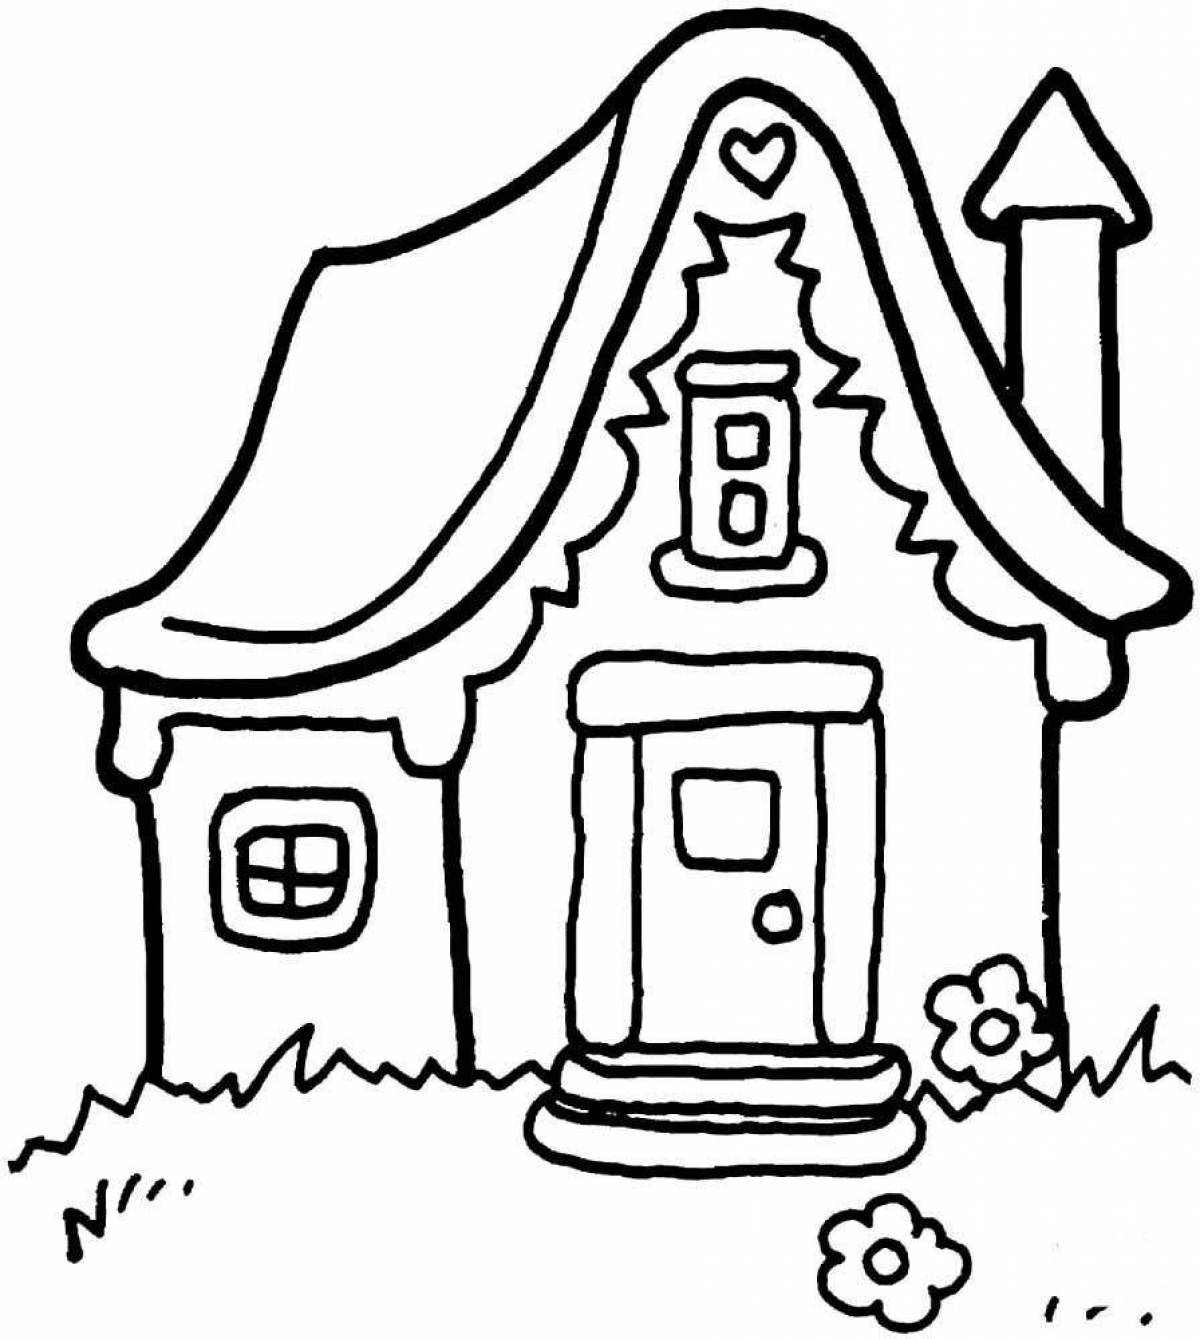 Amazing house wish game price coloring book